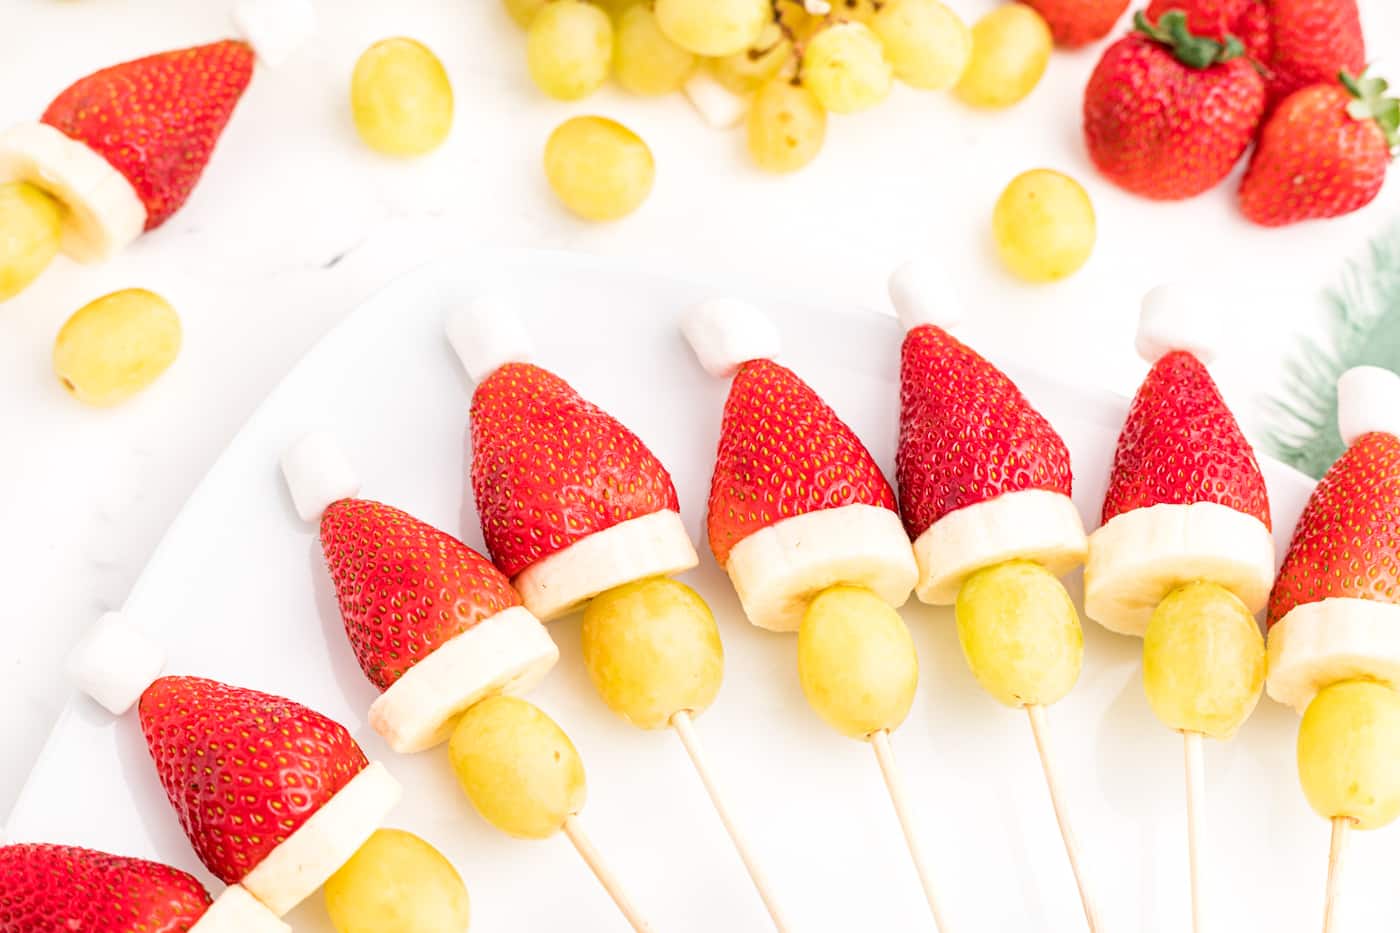 Grinch Fruit Kabobs (Healthy Christmas Snack) - Clean Eating Kitchen